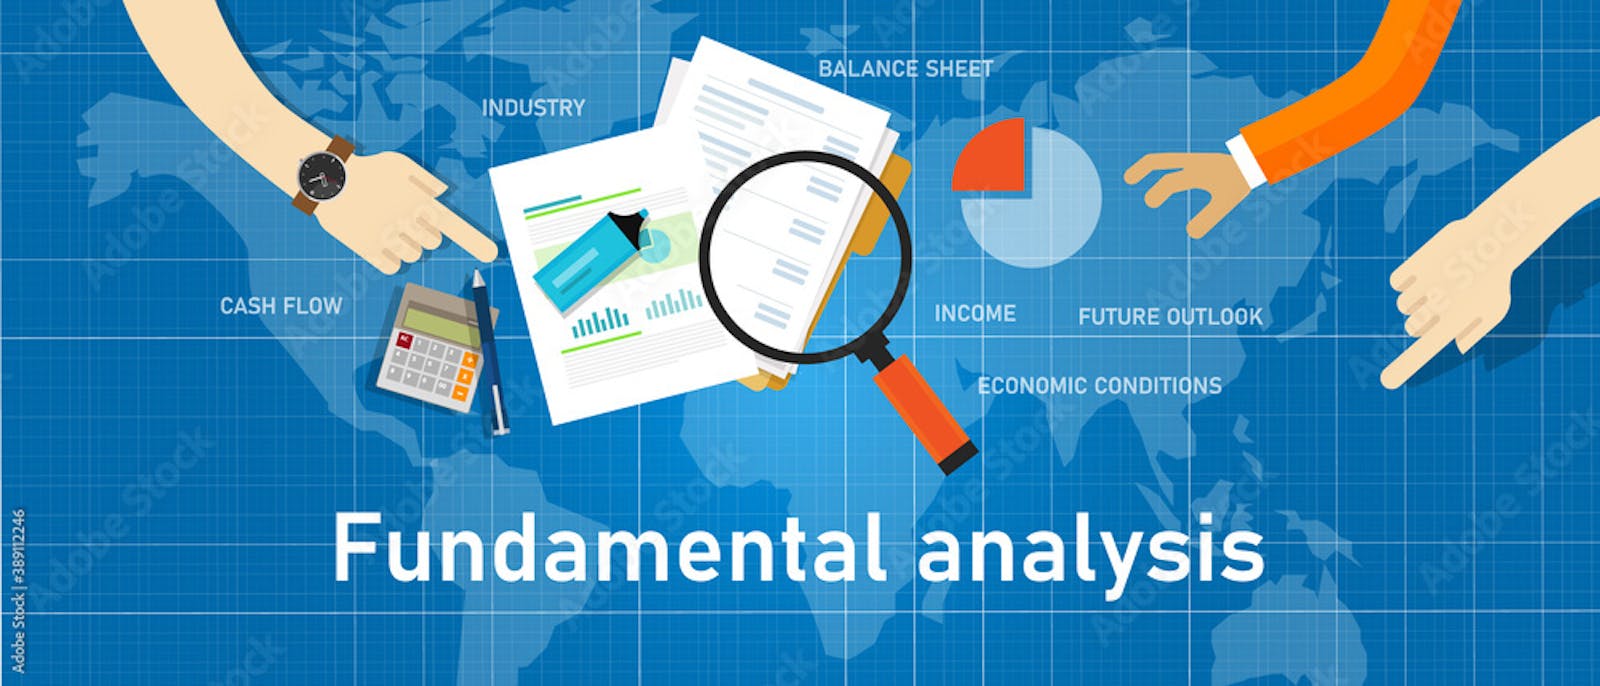 An Introduction to Fundamental Analysis and How it is Used in the Stock Market